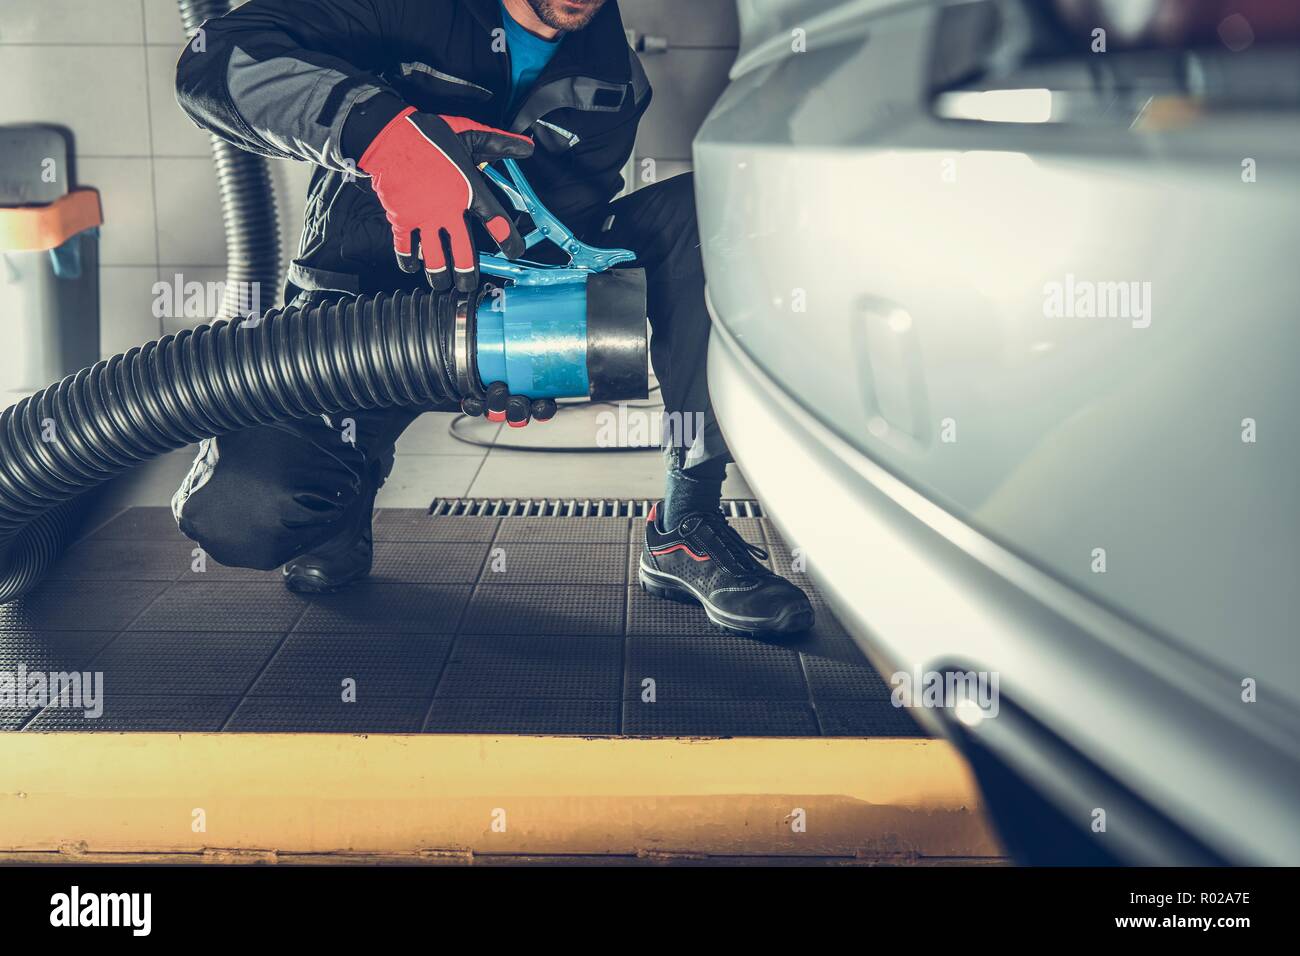 Removing Car Pollution While Maintenance Inside the Auto Service Building. Automotive Equipment. Stock Photo